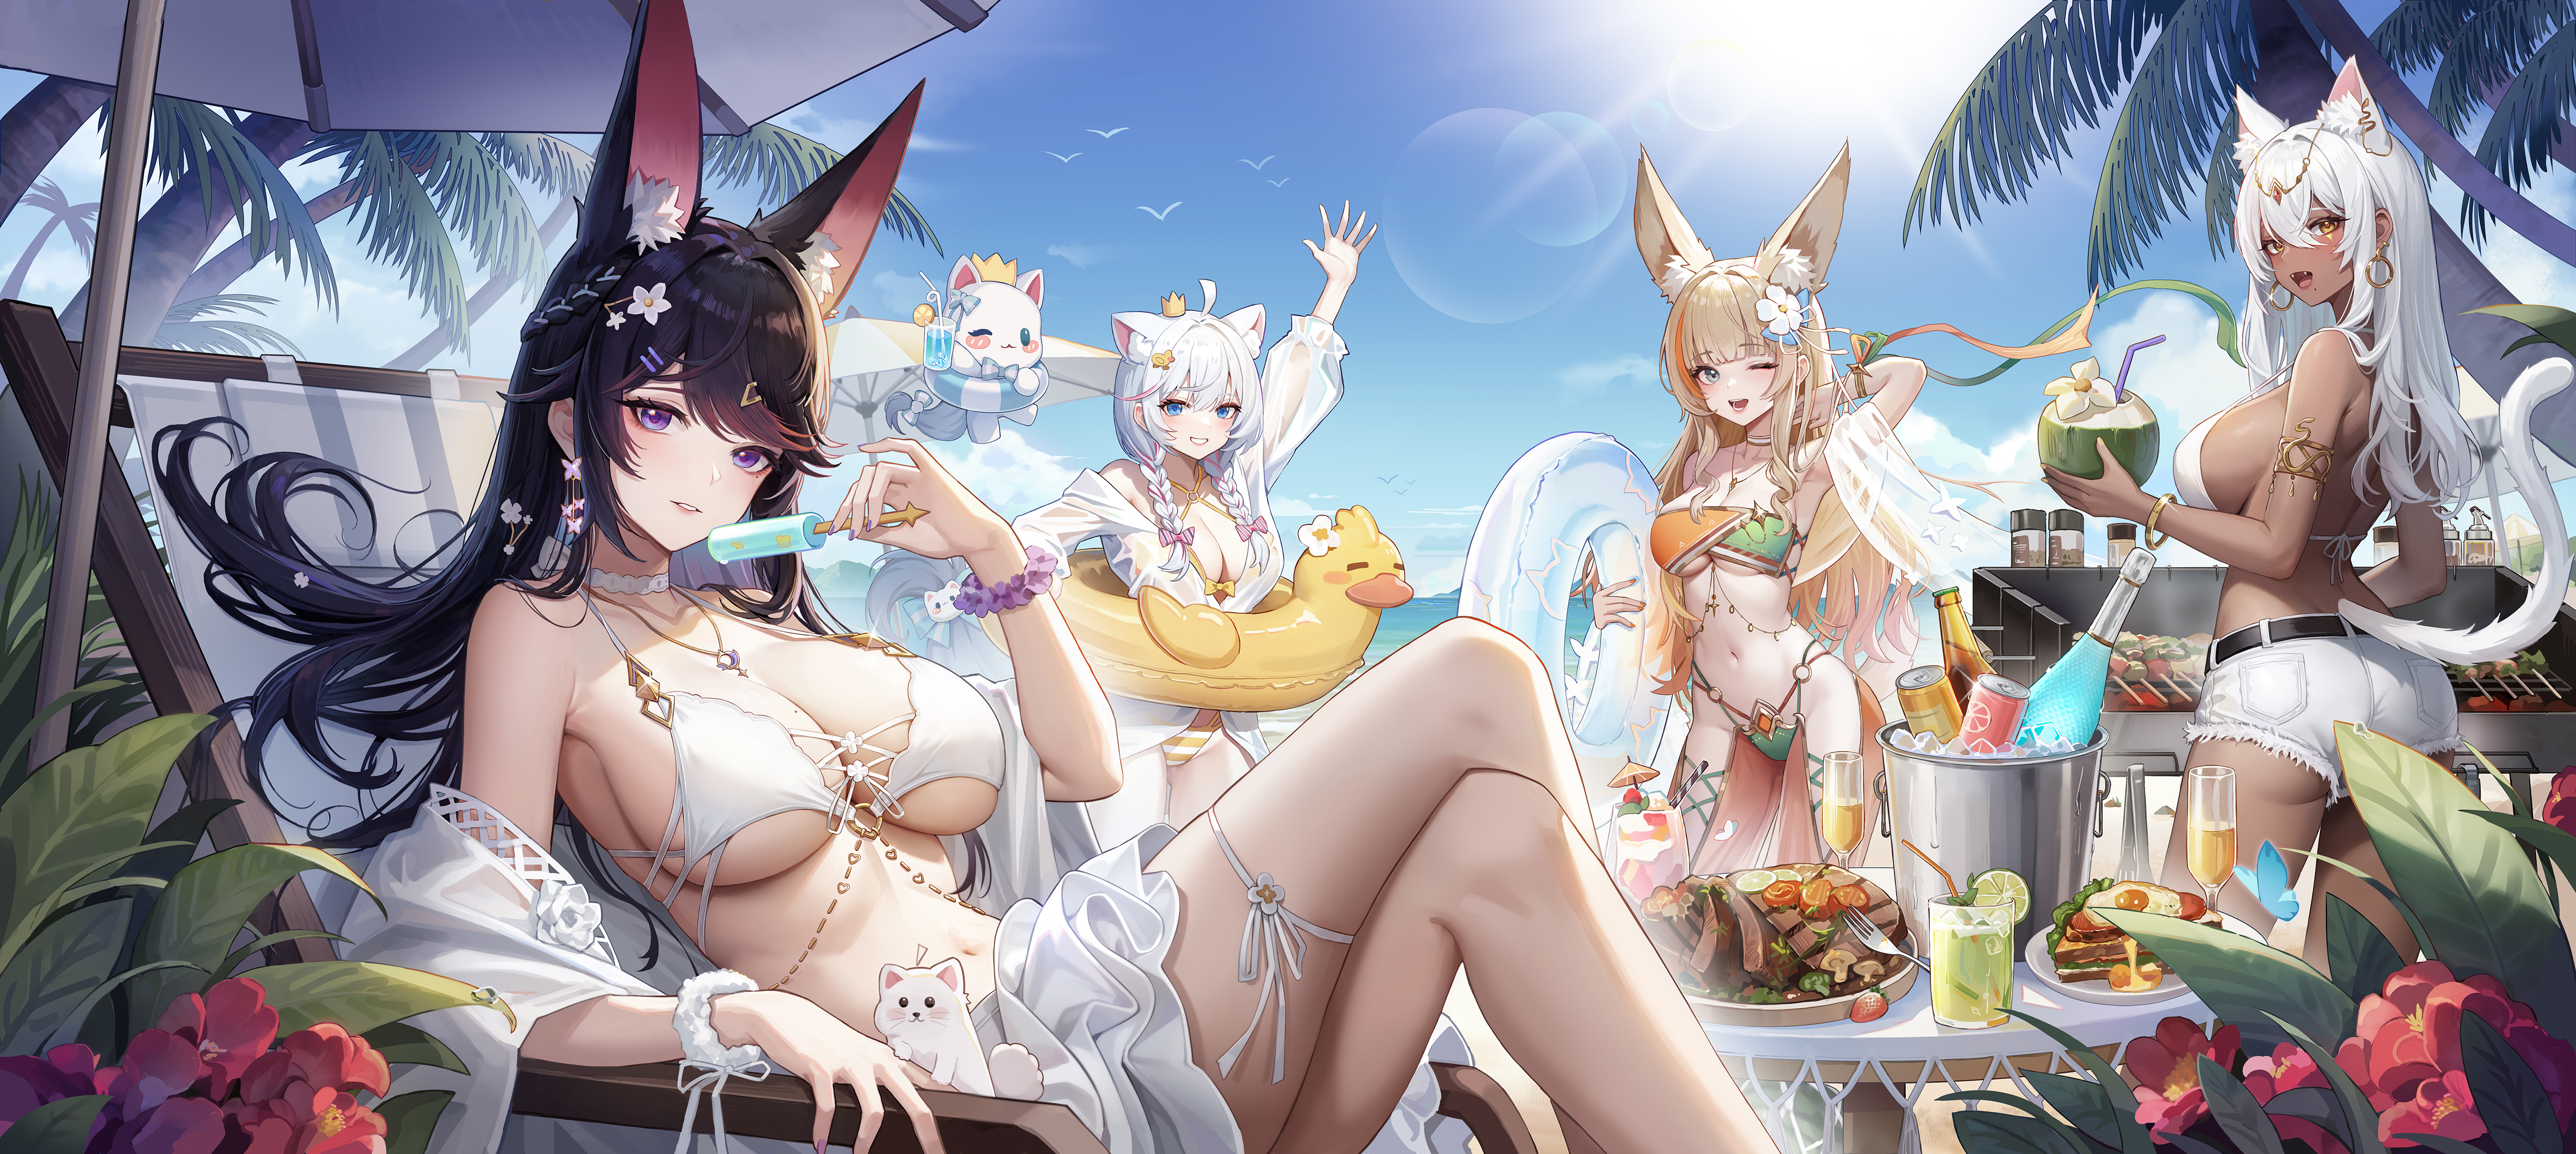 Anime 5000x2240 anime girls animal ears group of women beach women on beach flowers looking at viewer bikini palm trees looking back big boobs legs crossed sideboob one eye closed women outdoors food drink leaves ass long hair barbecue grill creature hair ornament floater beach umbrella thigh strap jean shorts bottles blue butterflies cocktails open clothes sunlight one arm up sky clouds can popsicle tail meat sunbed wink crown flower in hair cleavage coconut milk braids